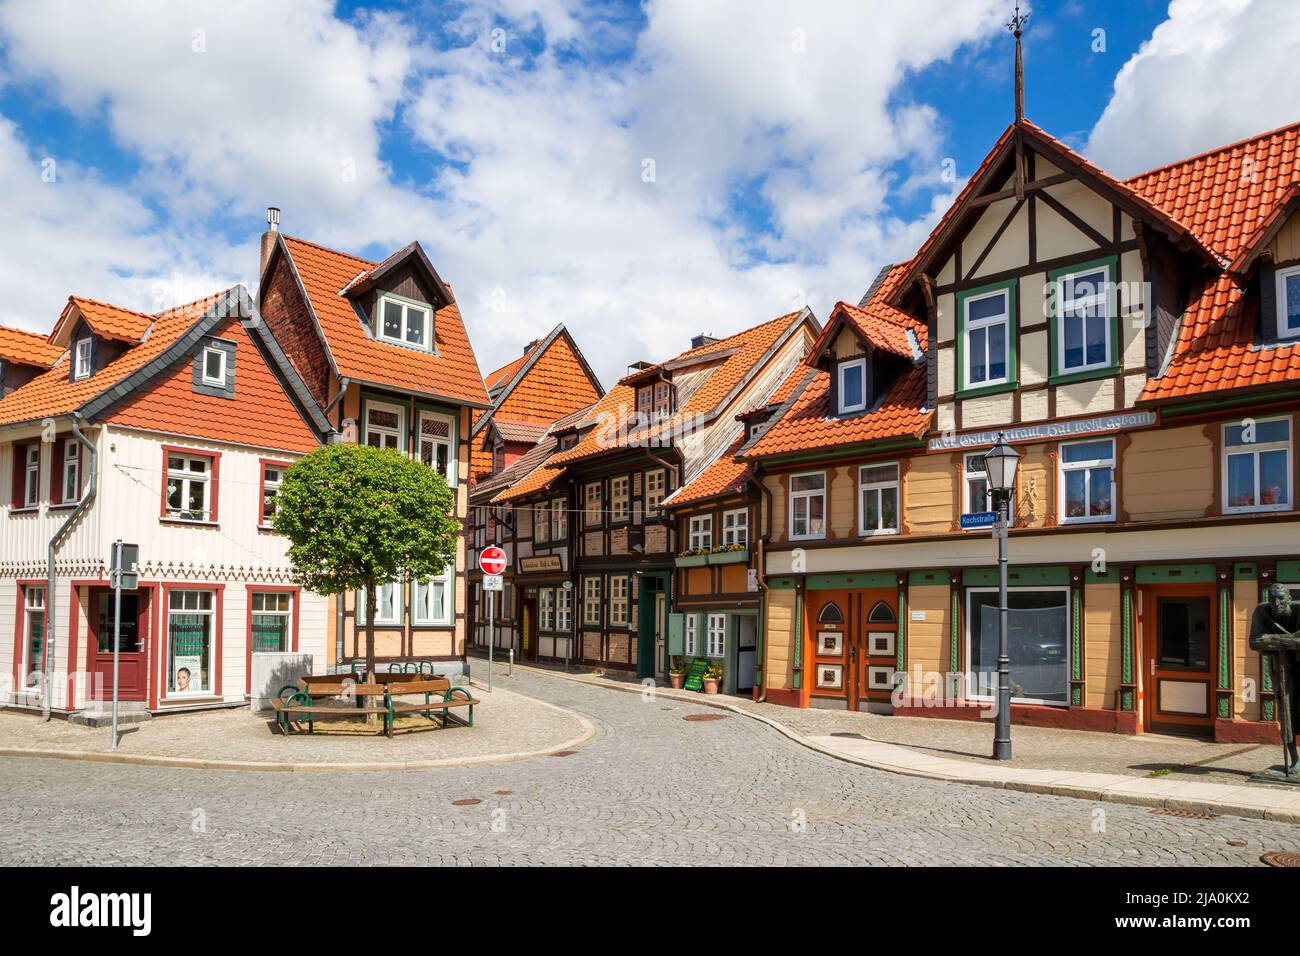 Historic timber framed houses in the centre of Wernigerode town in Saxony-Anhalt, Germany - April 26, 2018 Stock Photo